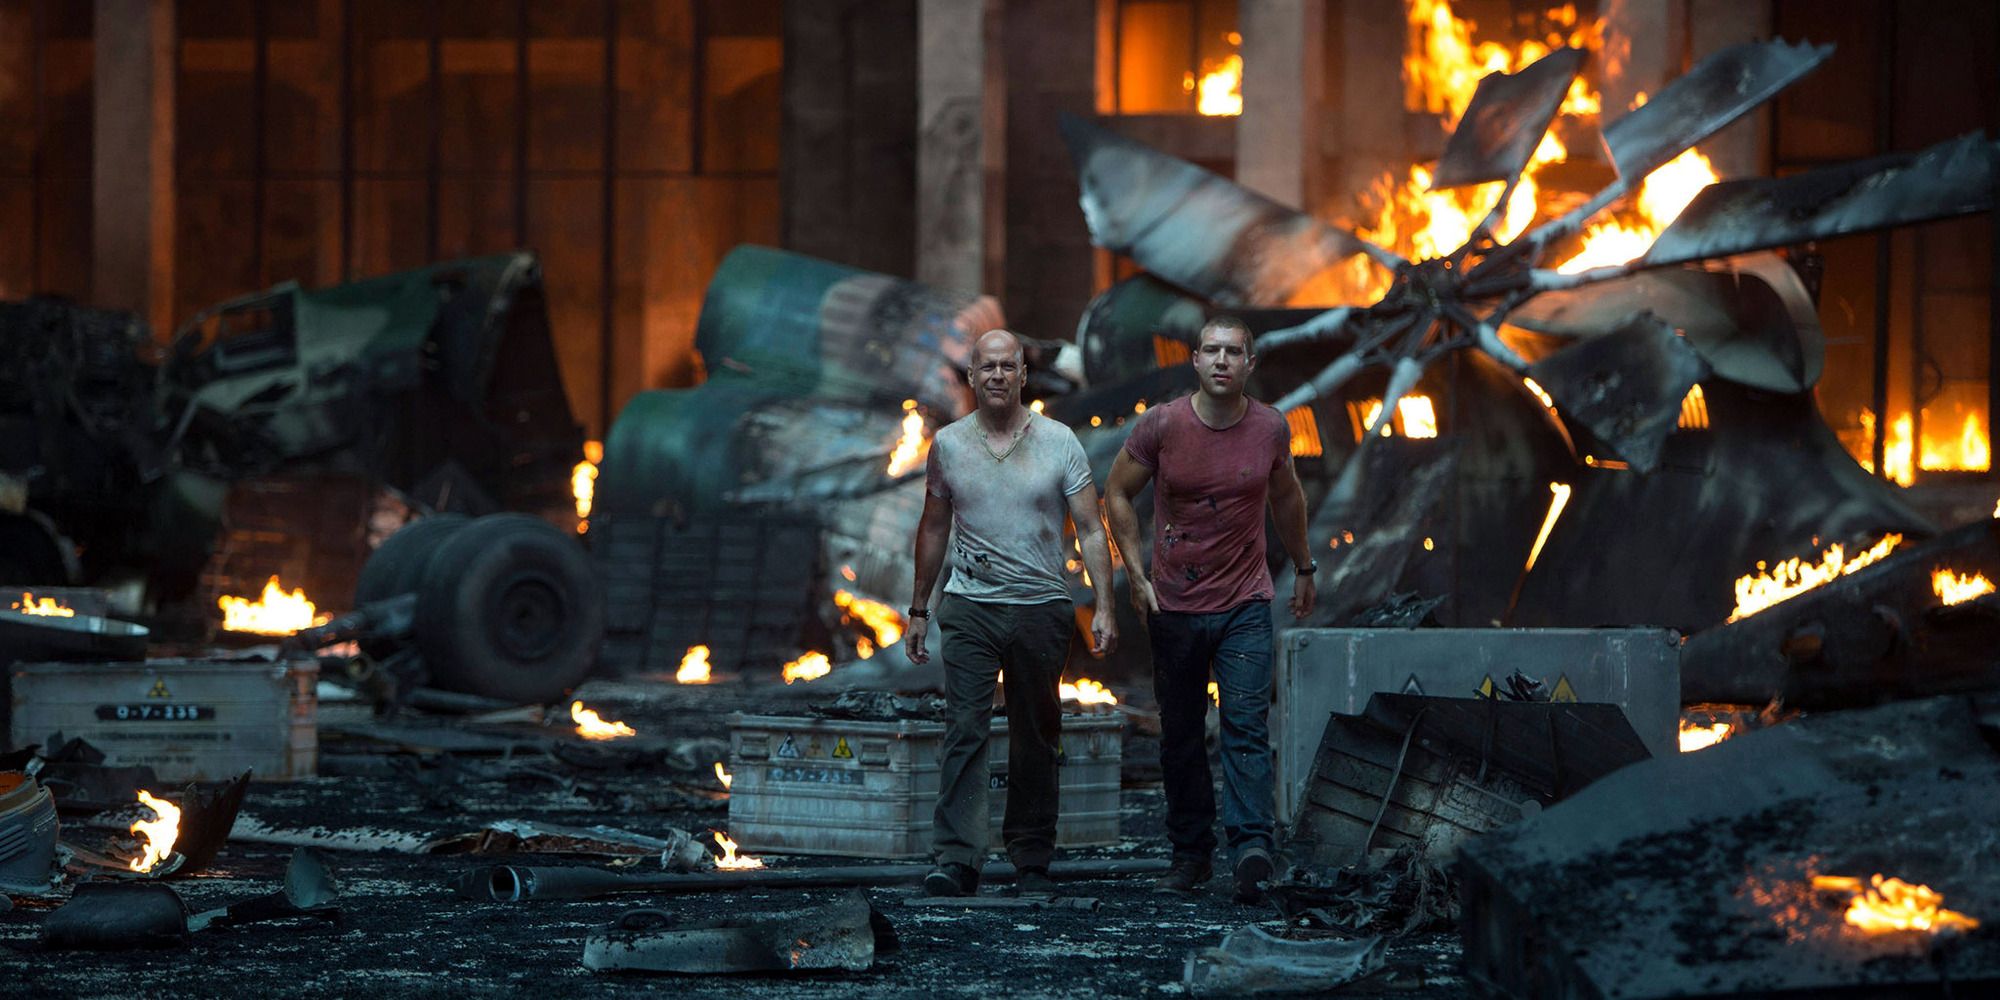 Bruce Willlis and Jai Courtney in 'A Good Day to Die Hard' walking away from an exploded helicopter